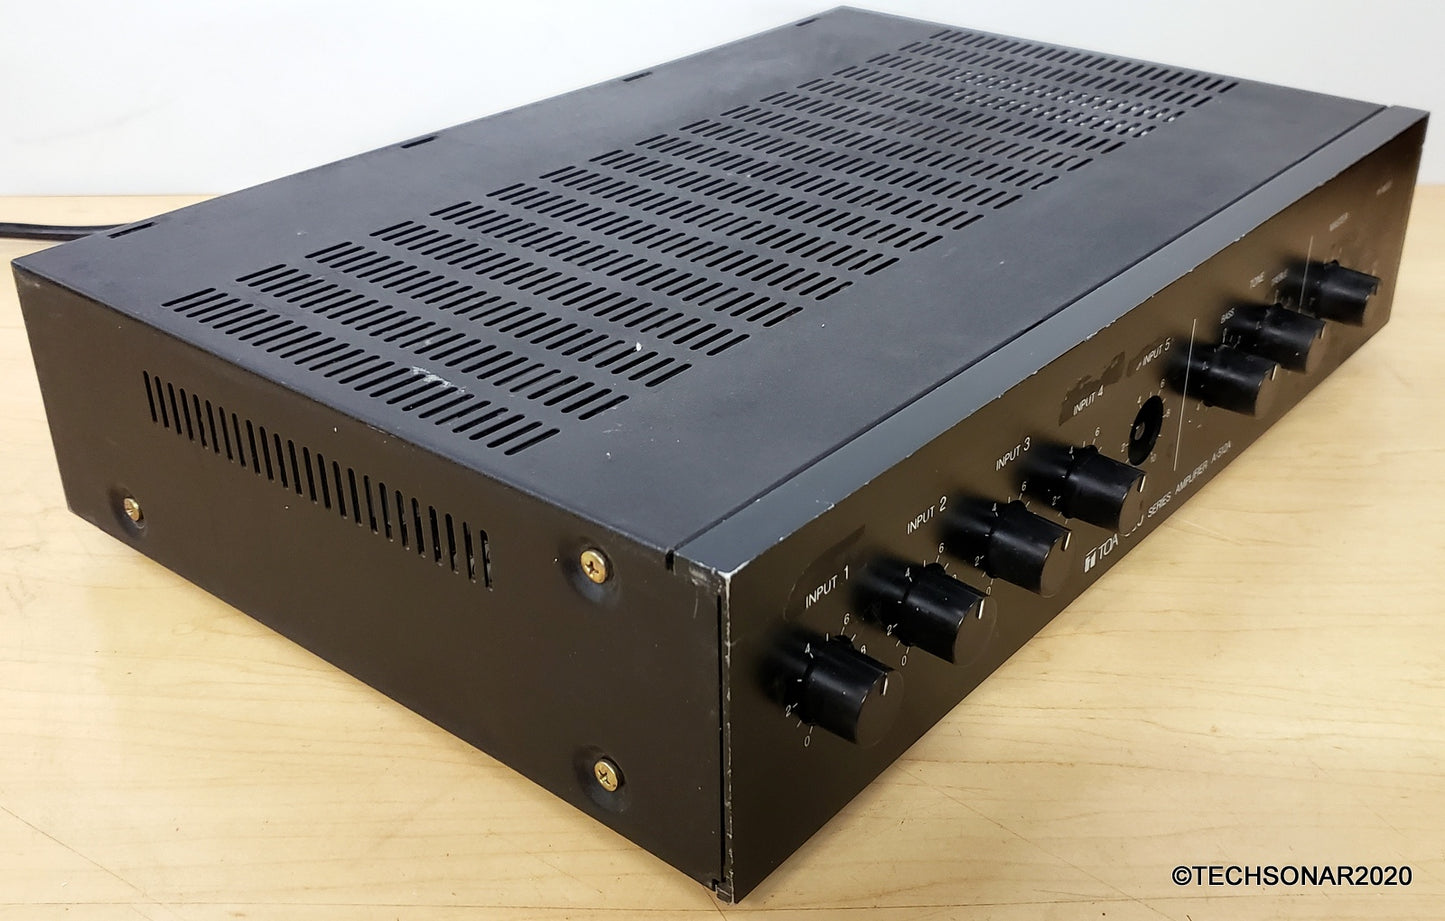 TOA 500 Series AMP A-512A Integrated Six Channel Mixer/ Amplifier for paging